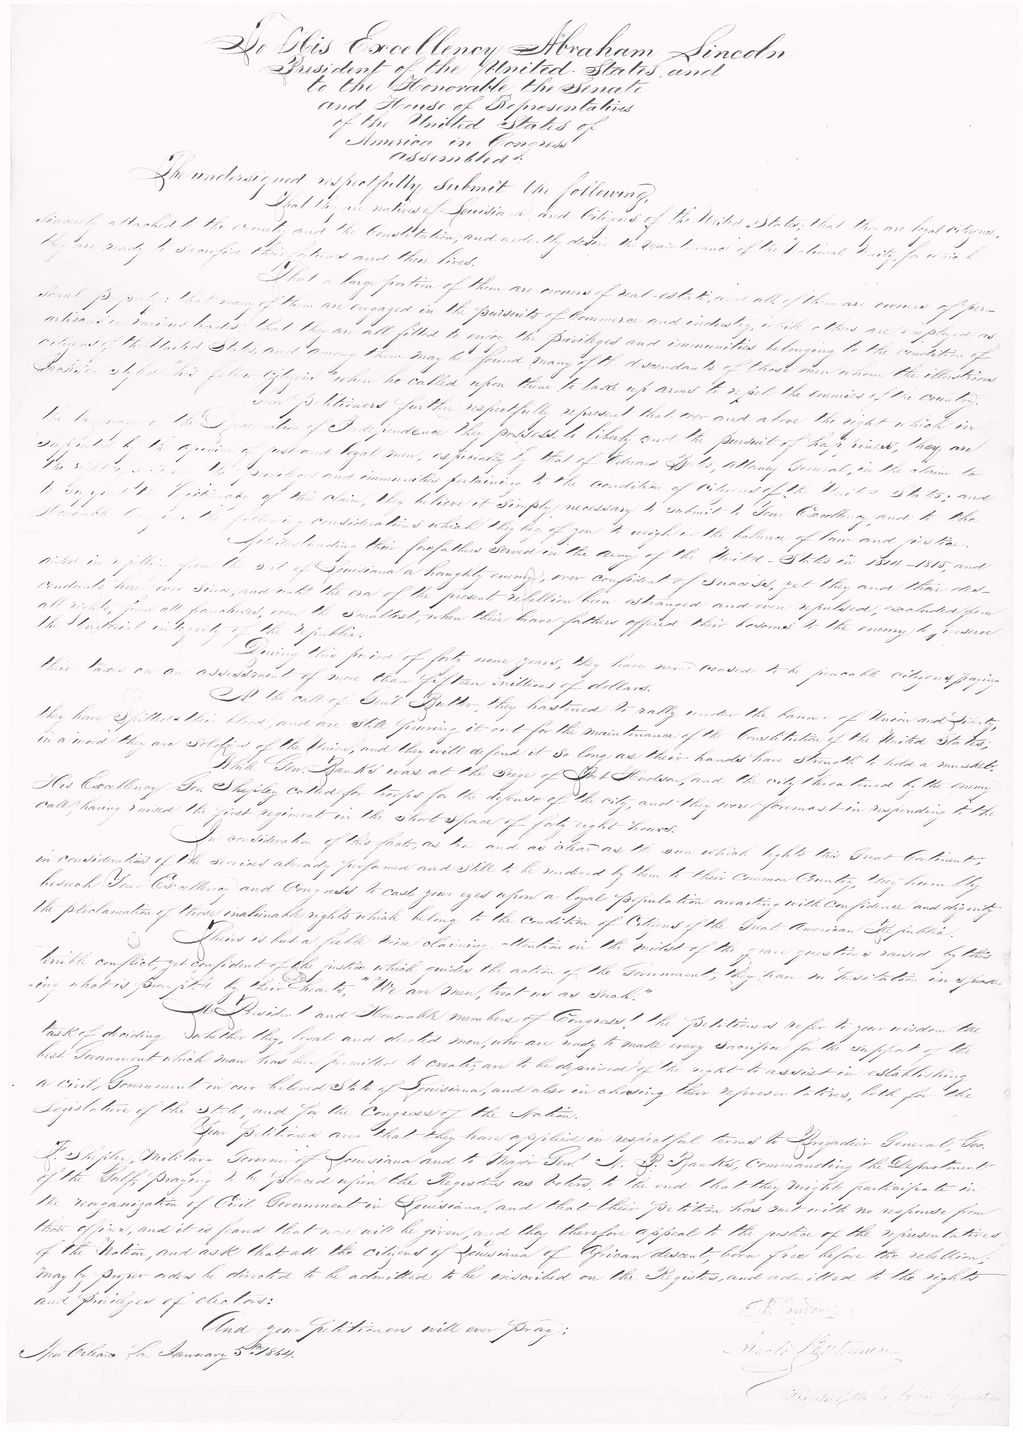 Petition to President Abraham Lincoln written by Free Colored People of Louisiana on January 5, 1864